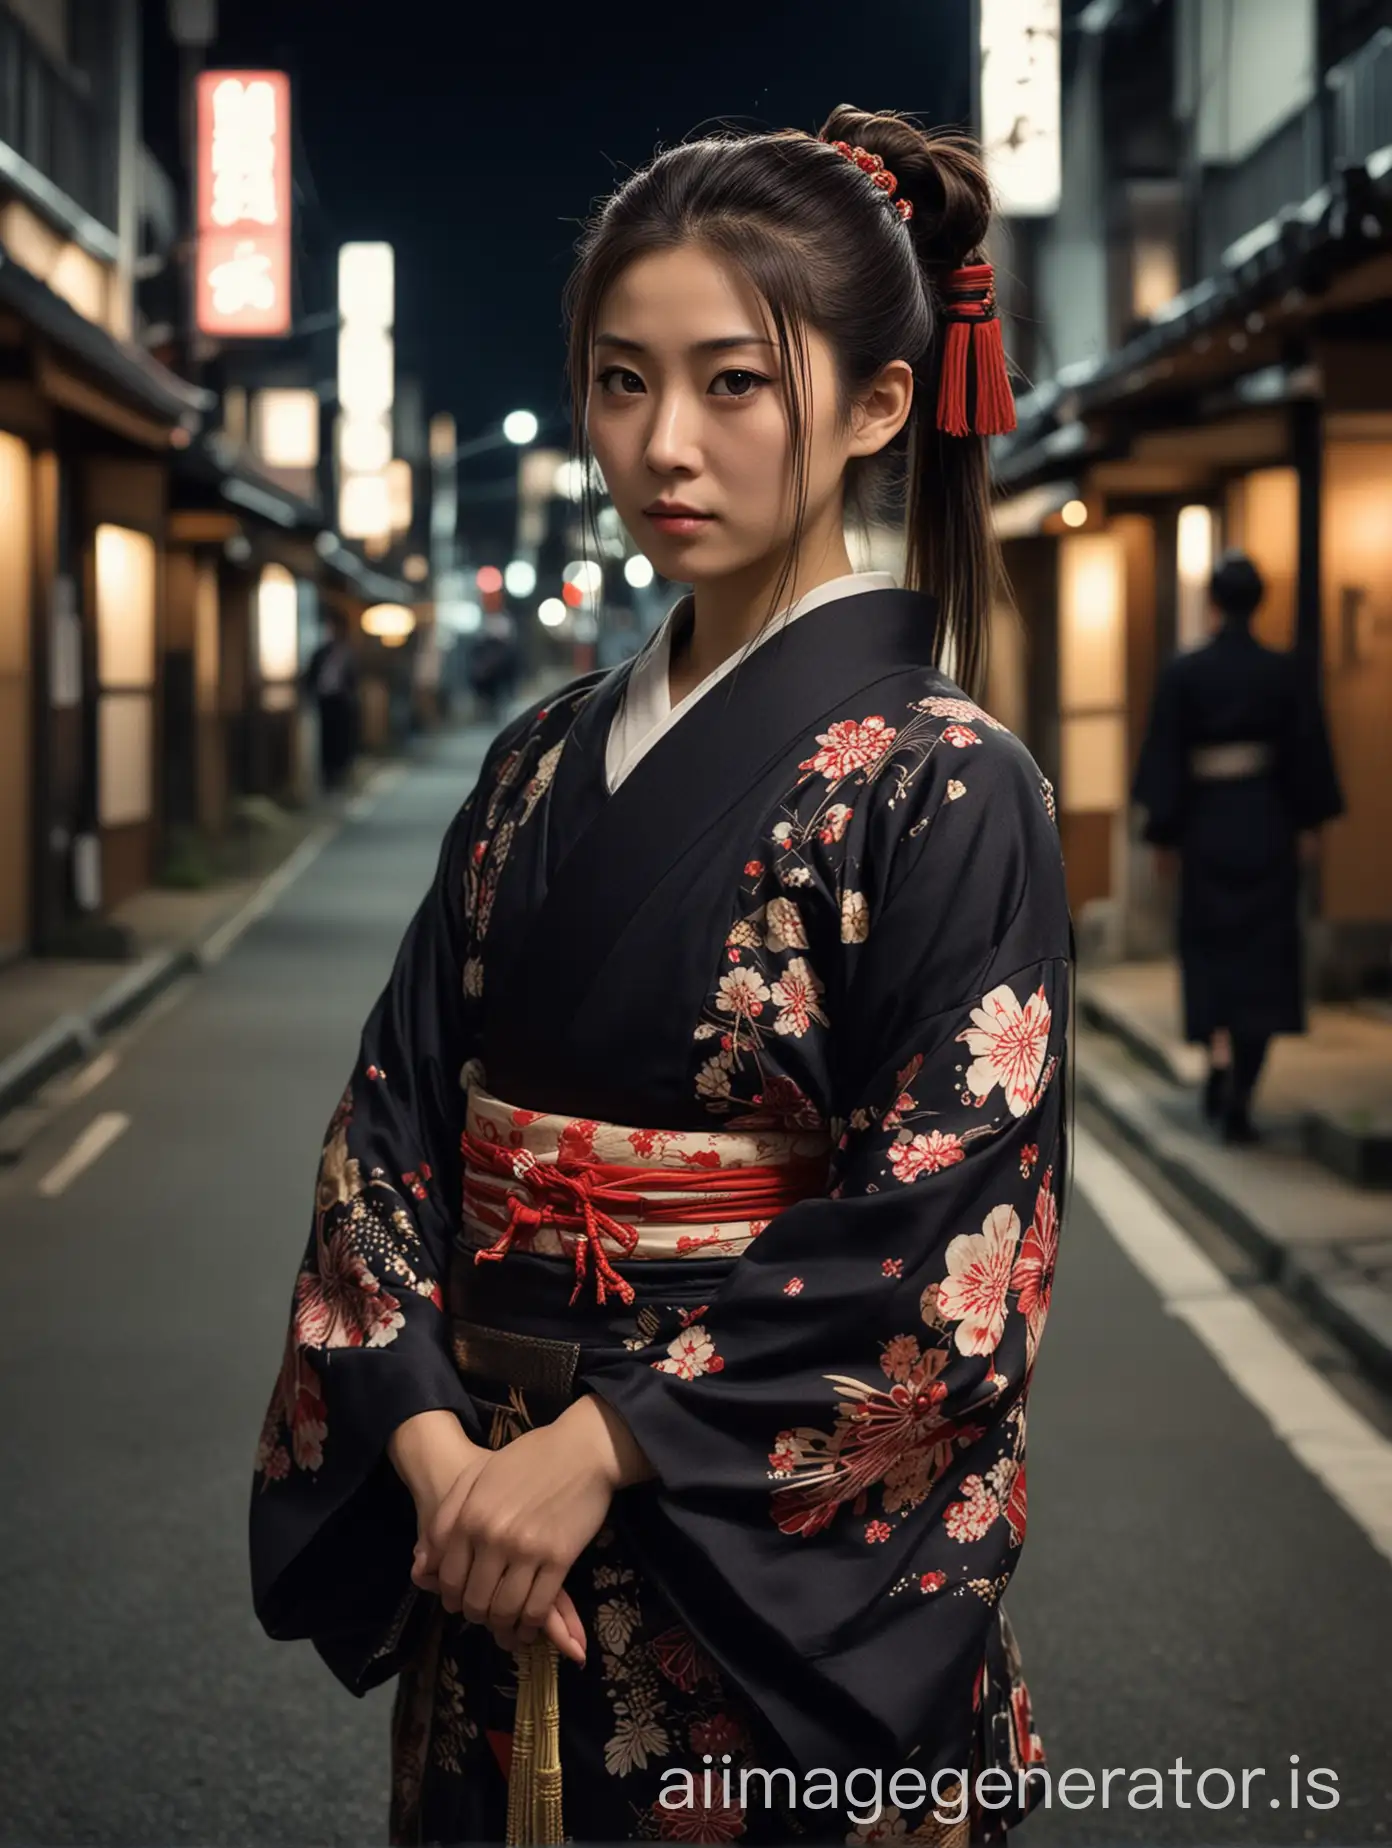 Mysterious-Gothic-Samurai-Woman-Stands-Alone-in-Night-Street